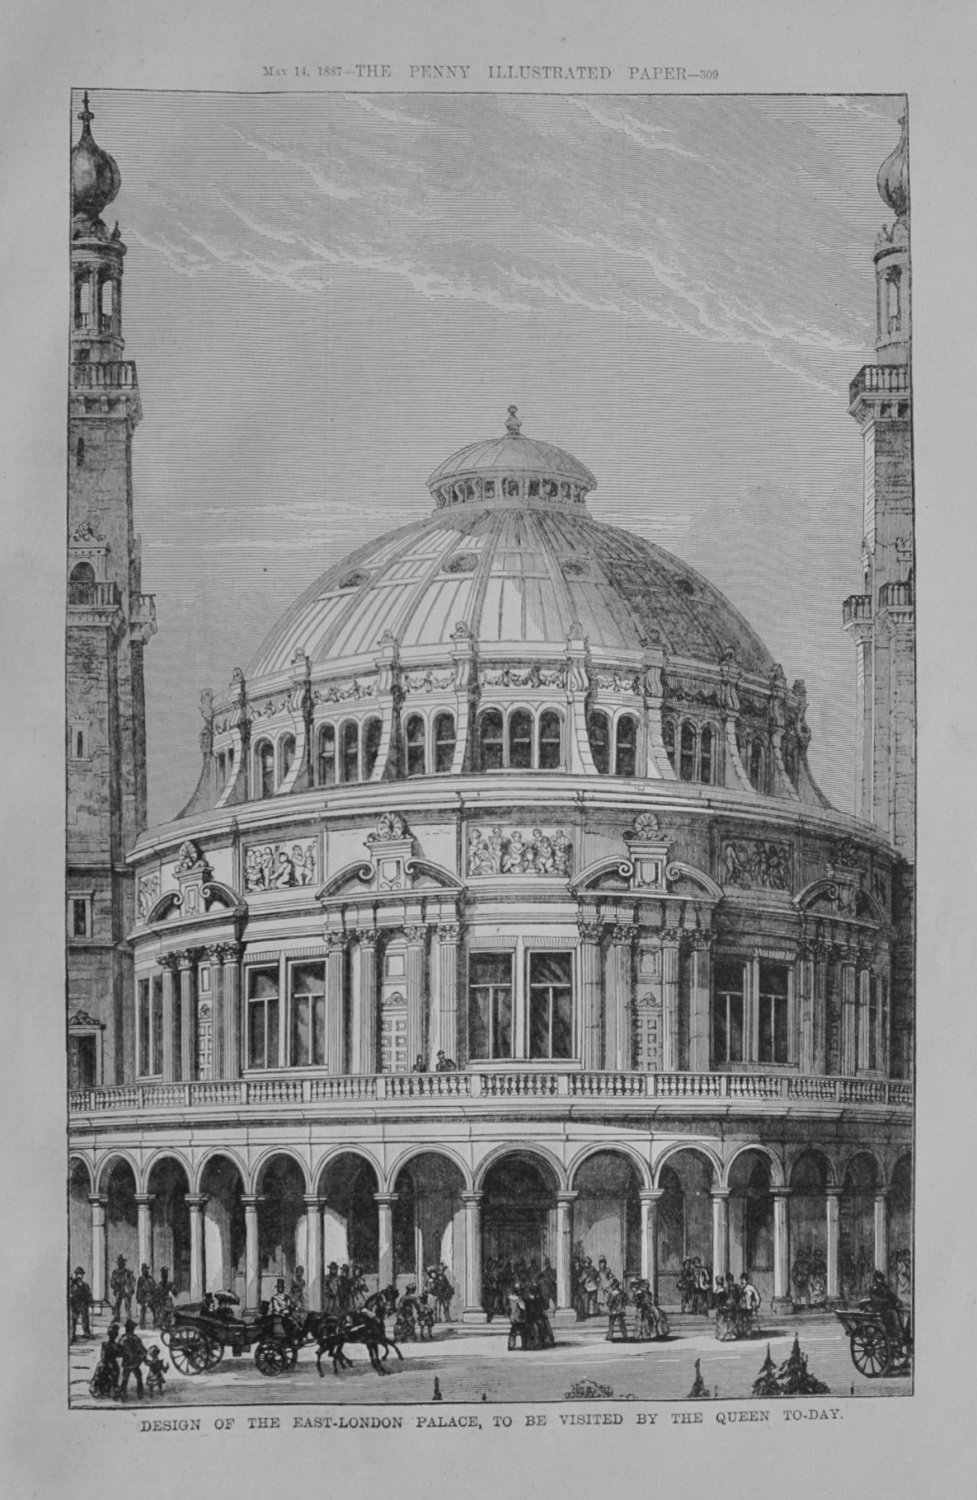 People's Palace for the East-End - 1887